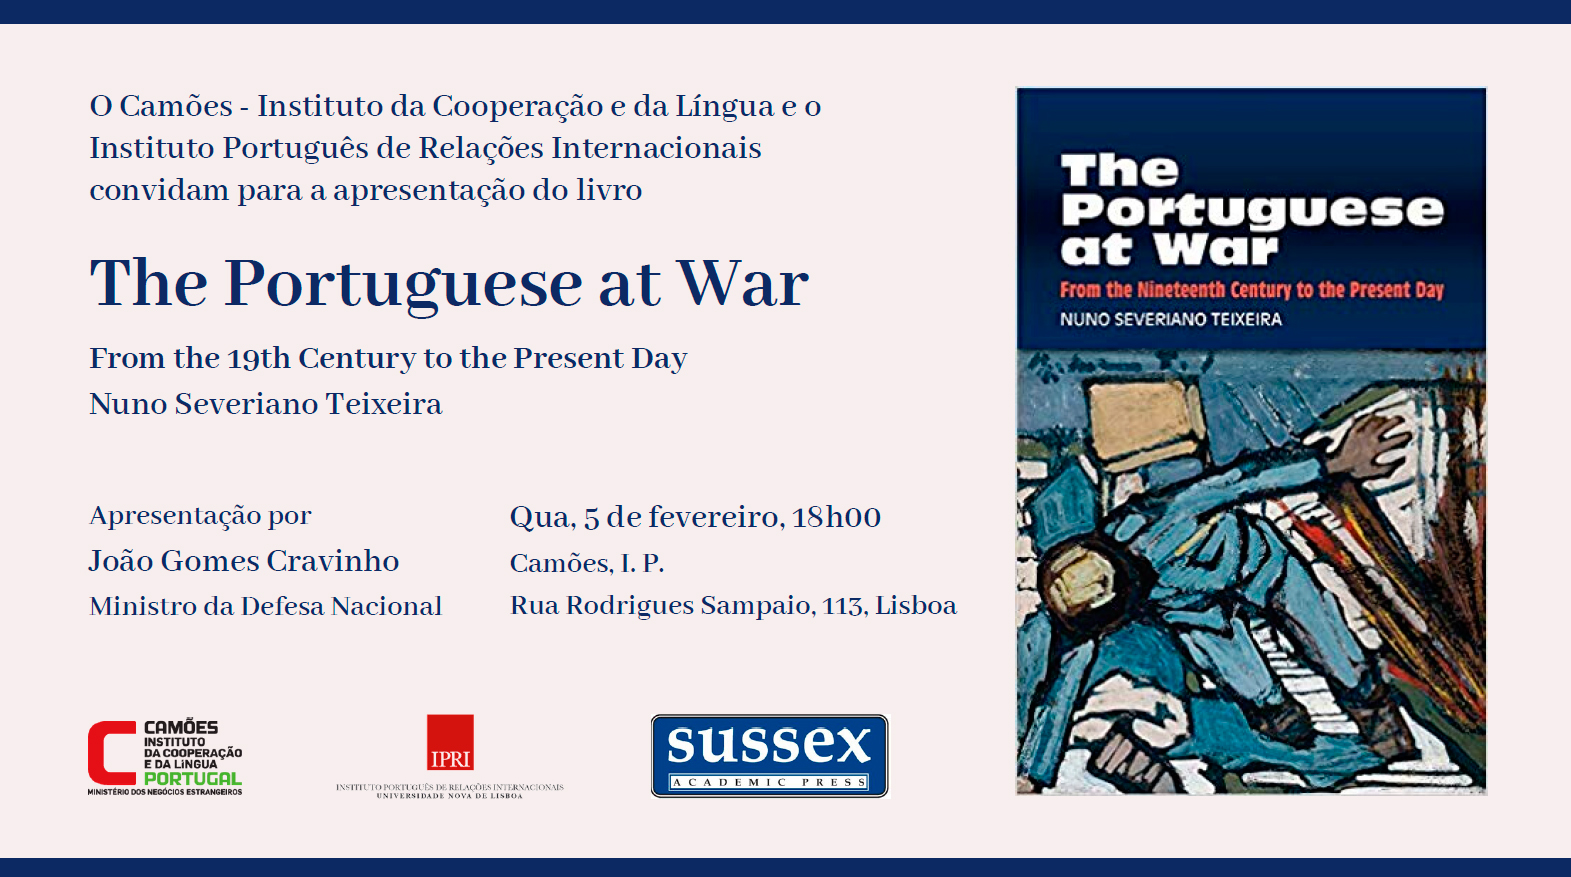 "The Portuguese at War: From the Nineteenth Century to the Present Day"